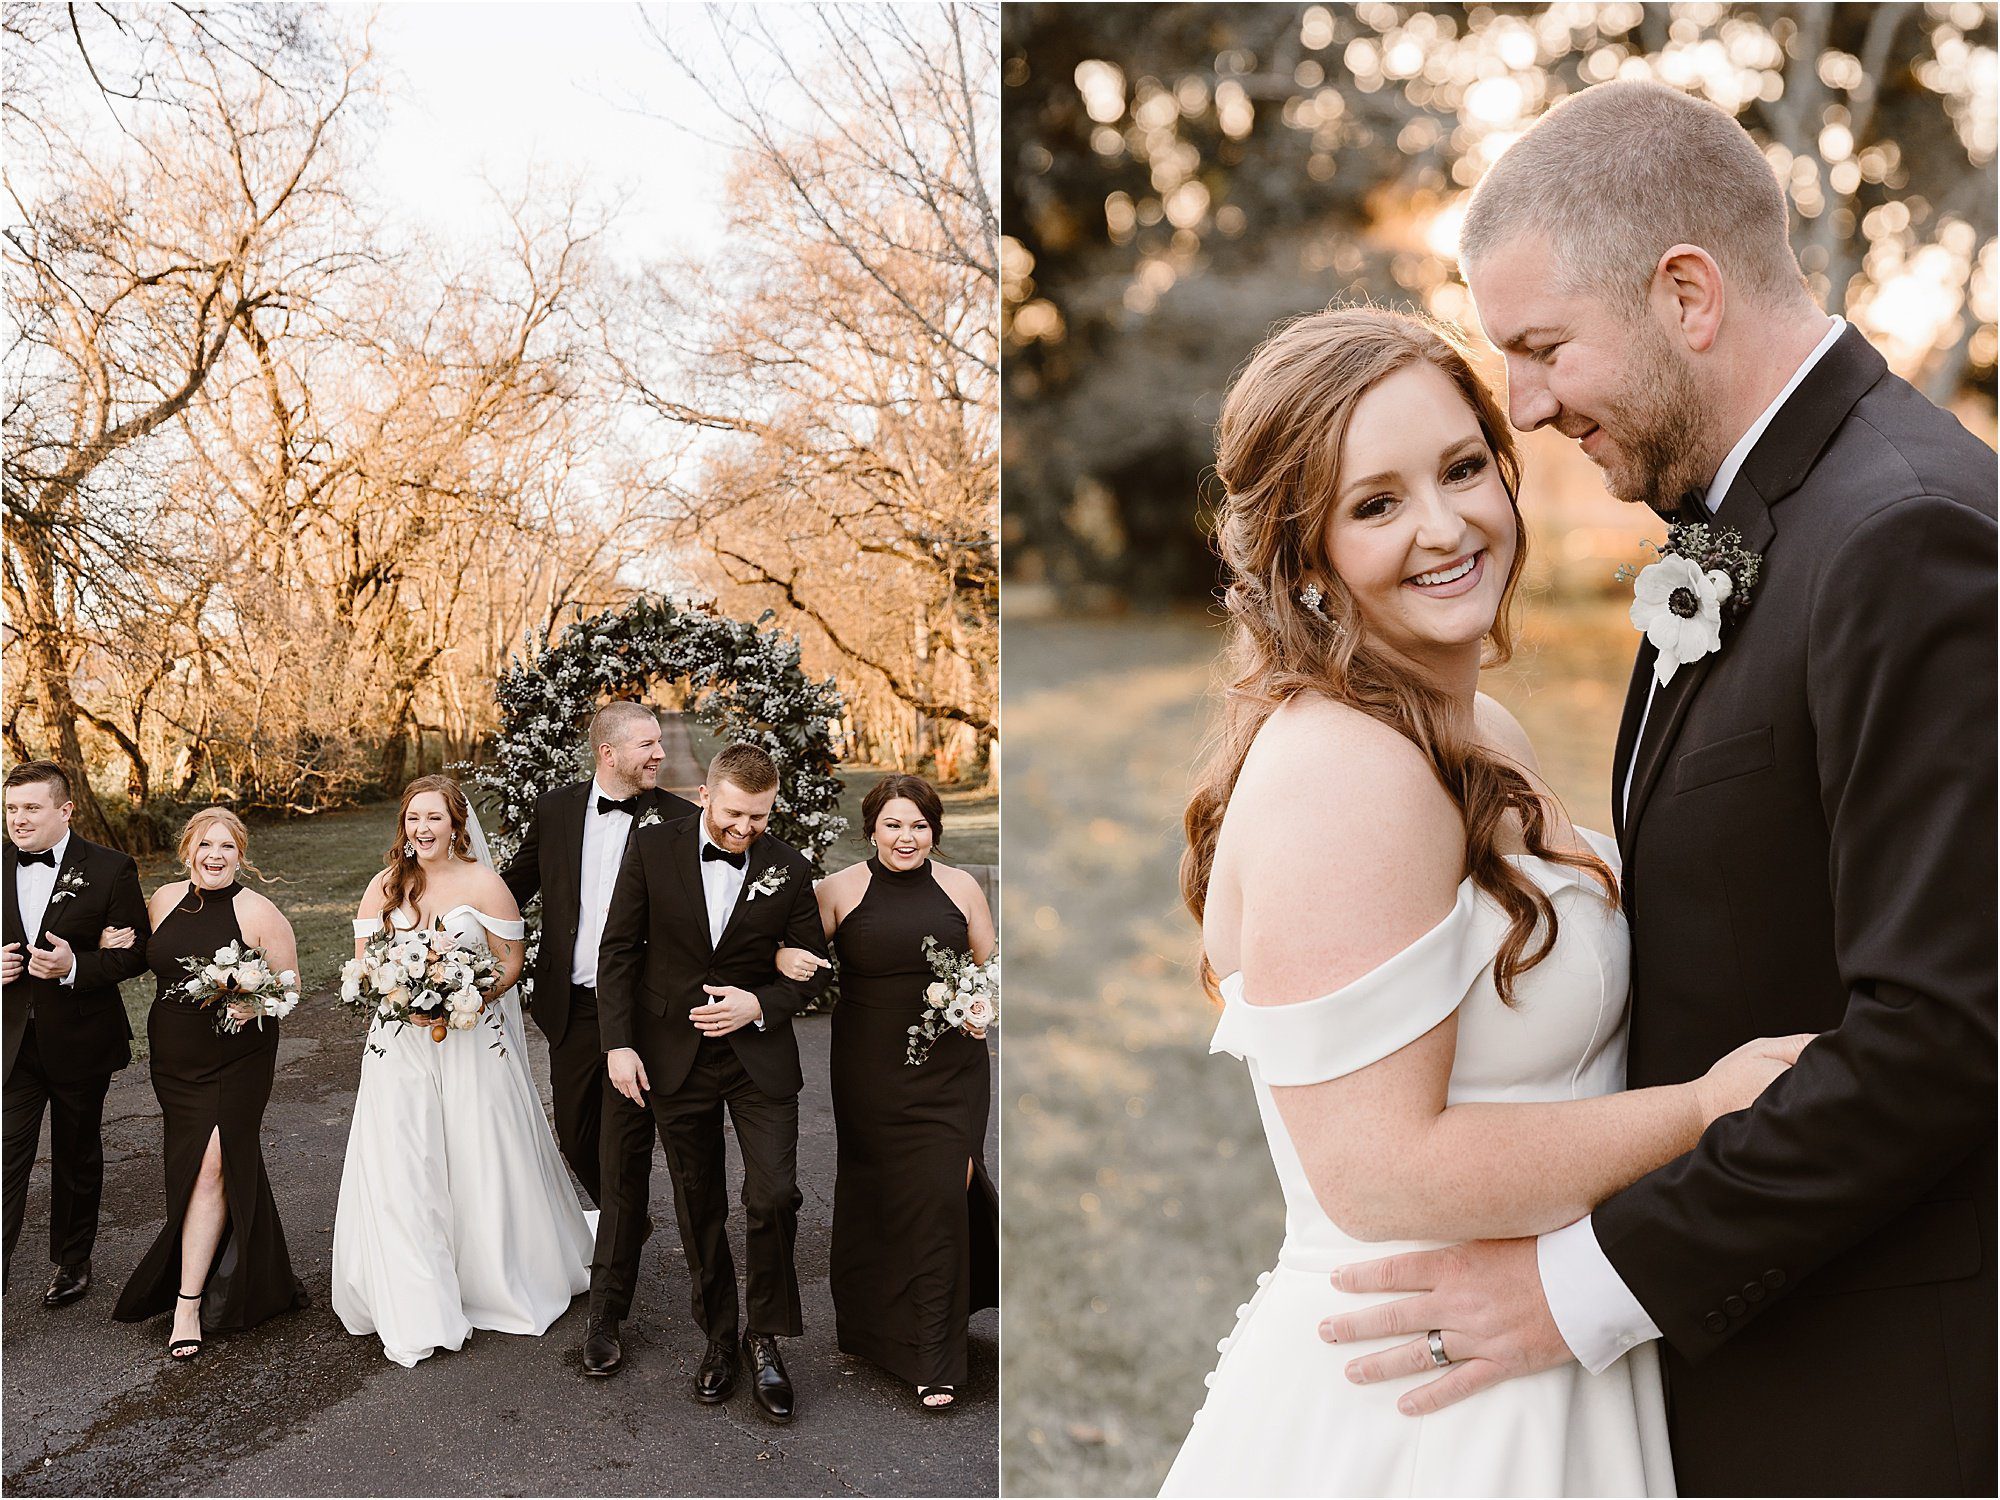 golden hour photos with wedding party and bride and groom